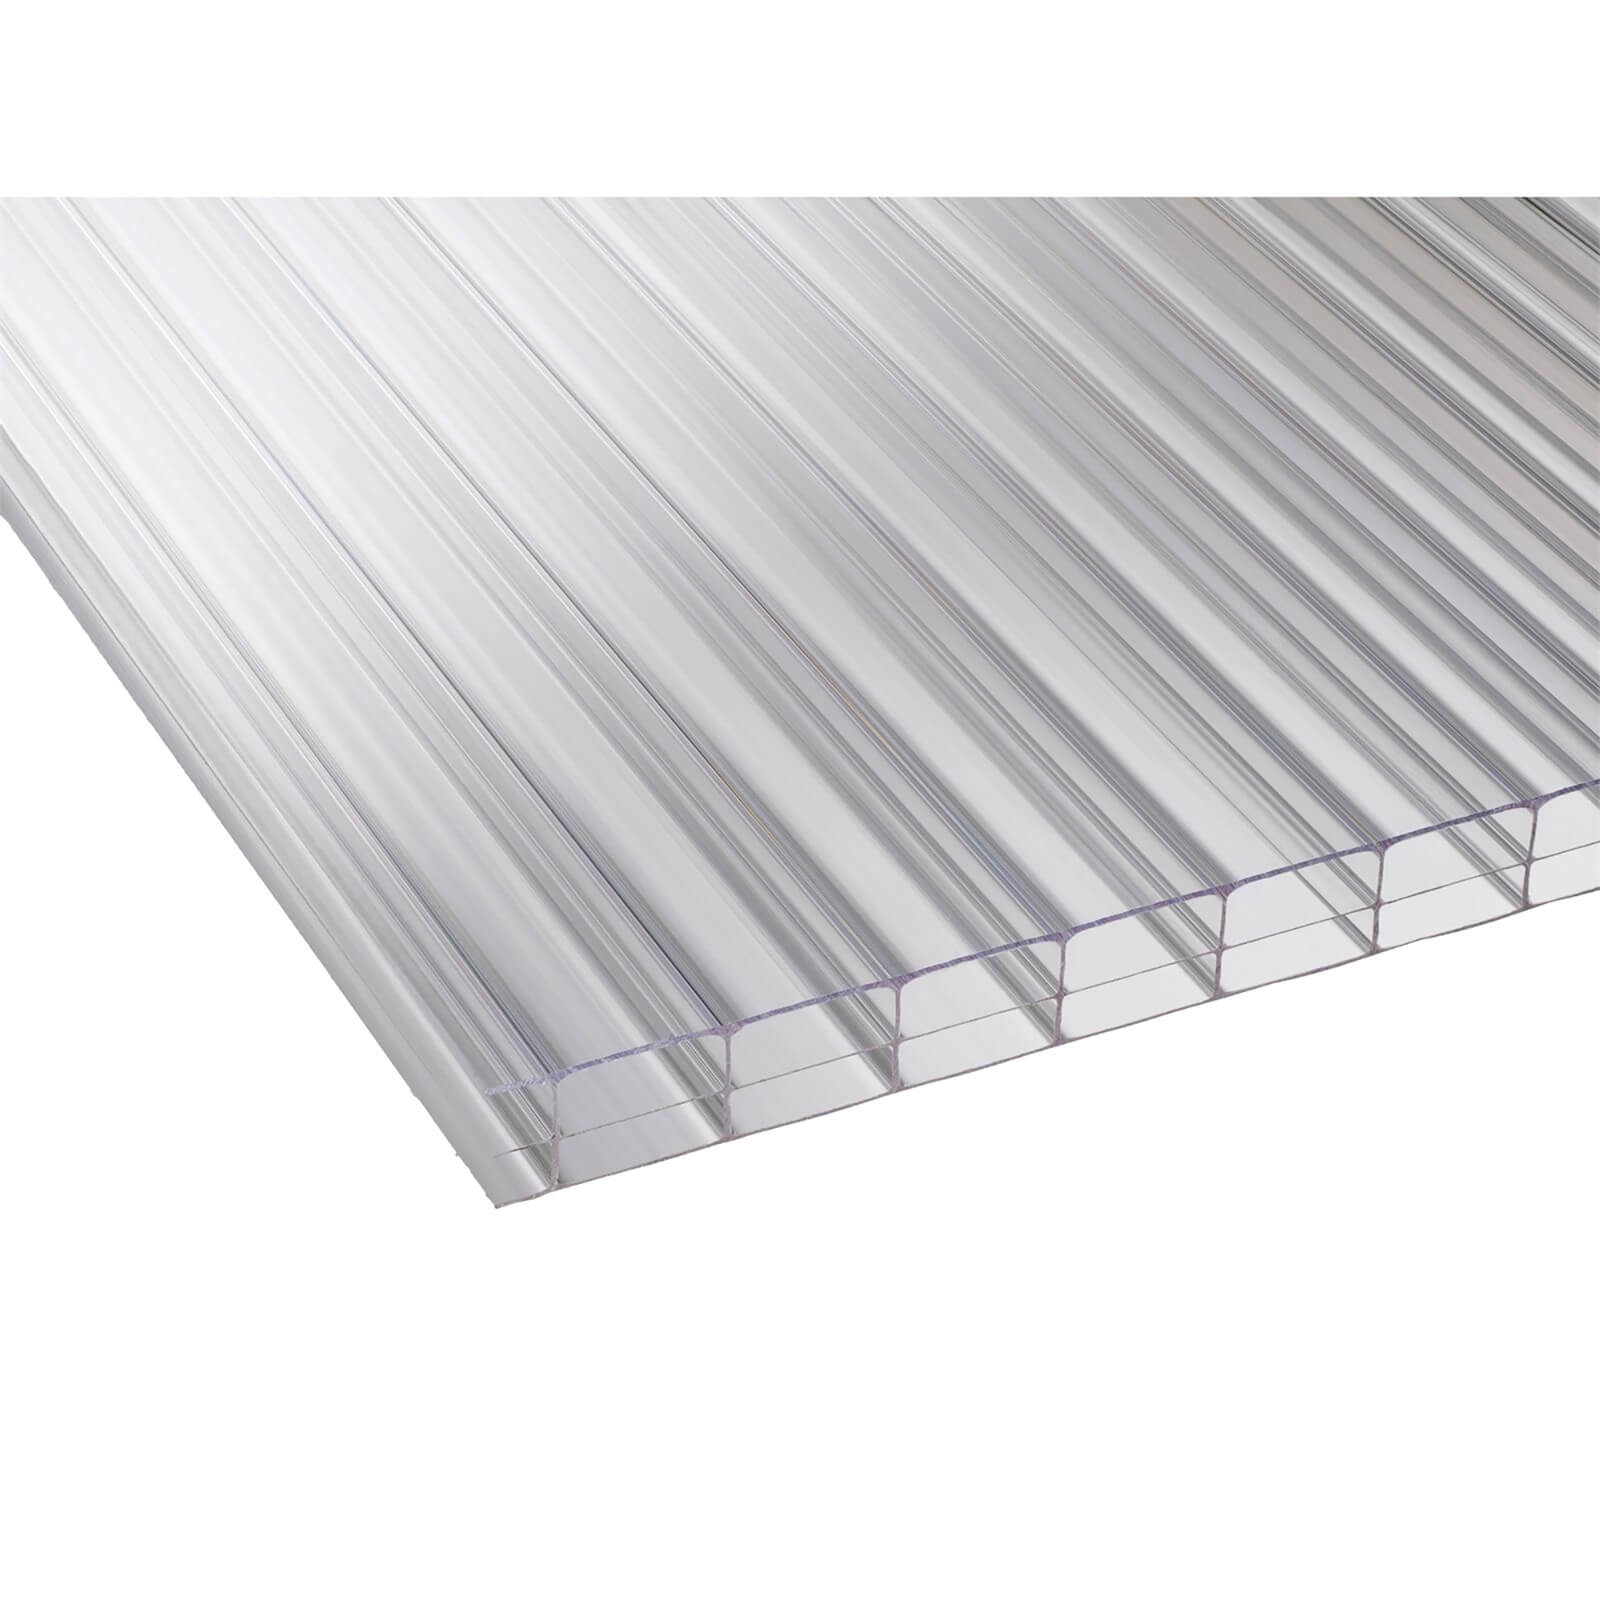 Photo of Corotherm Glazing & Roofing Sheet 3000x1050x16mm - 3 Pack